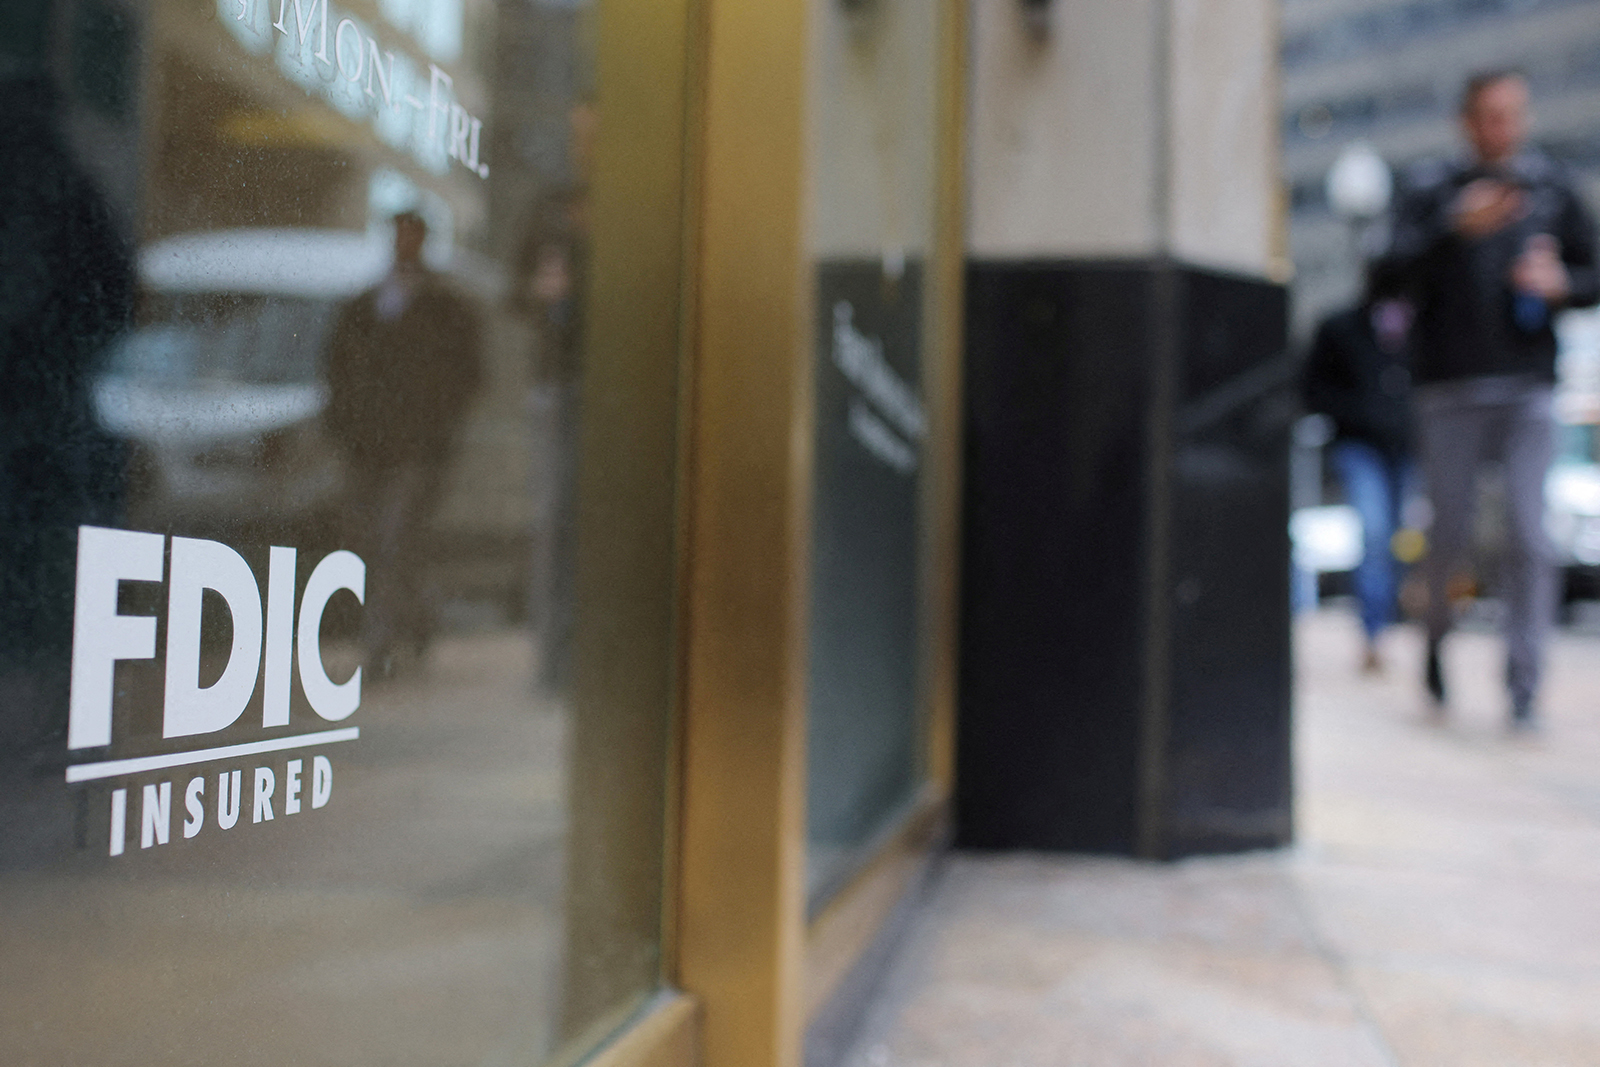 A sign reads “FDIC Insured” on the door of a branch of First Republic Bank in Boston, Massachusetts, on March 13.